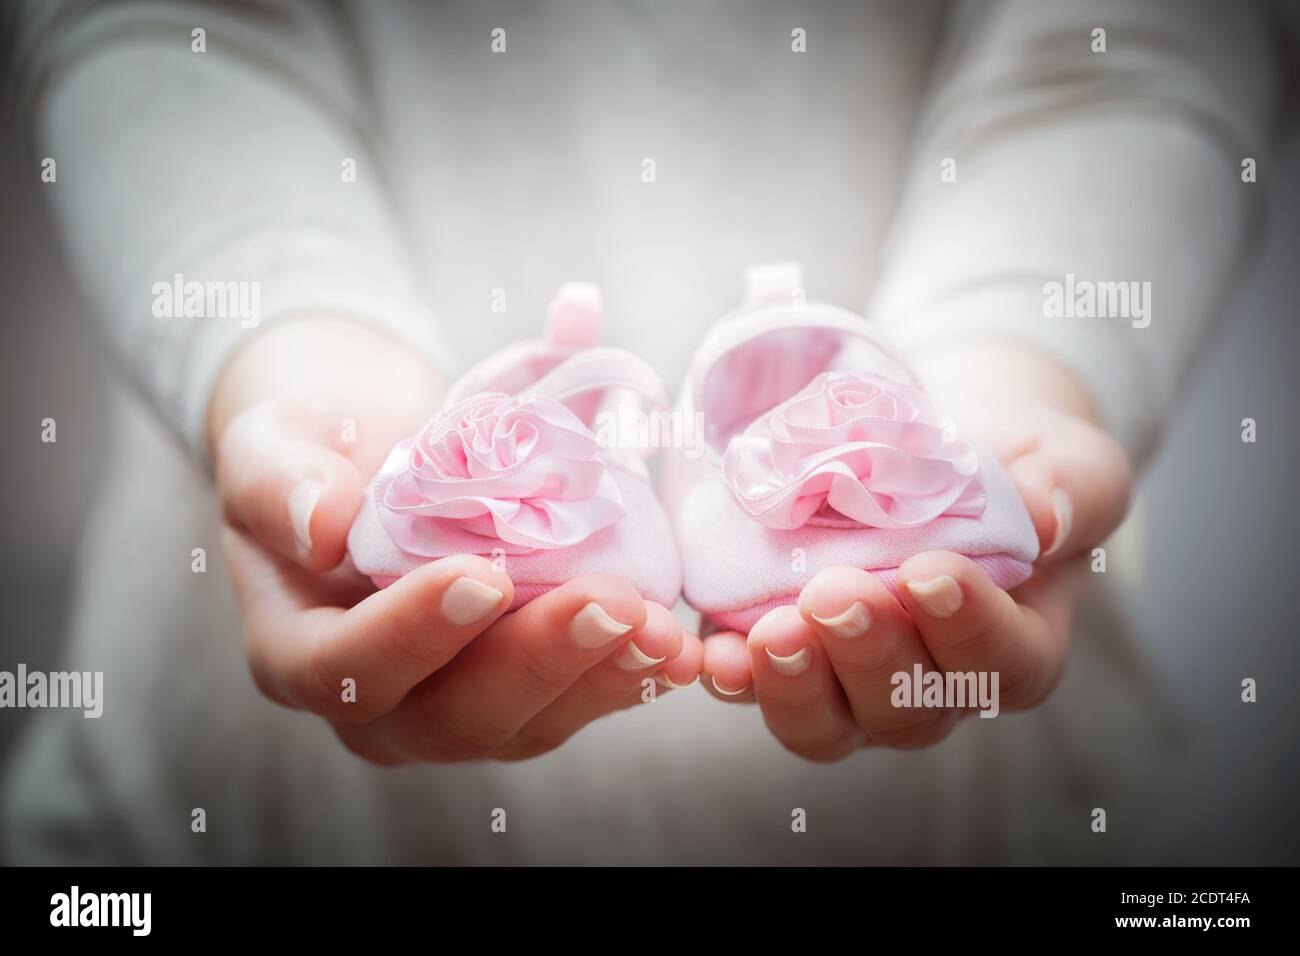 Little baby shoes in woman#39;s hands. Concepts of waiting for a child, charity, mother etc. Stock Photo